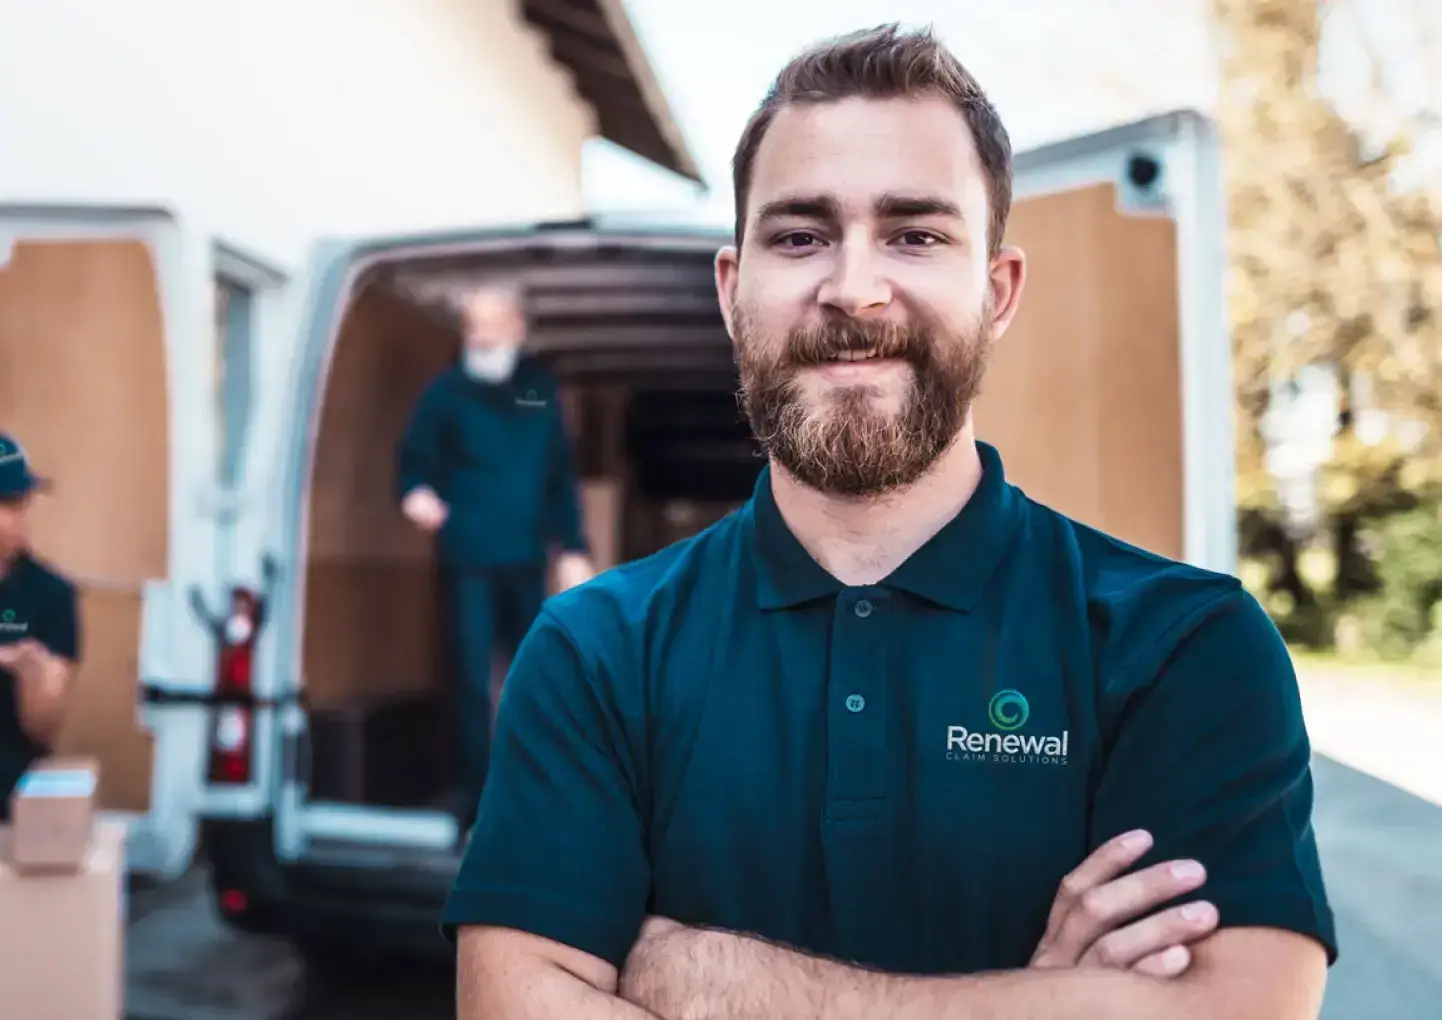 A smiling Renewal employee stands in front of a branded Renewal van after providing fire damage clean up services.